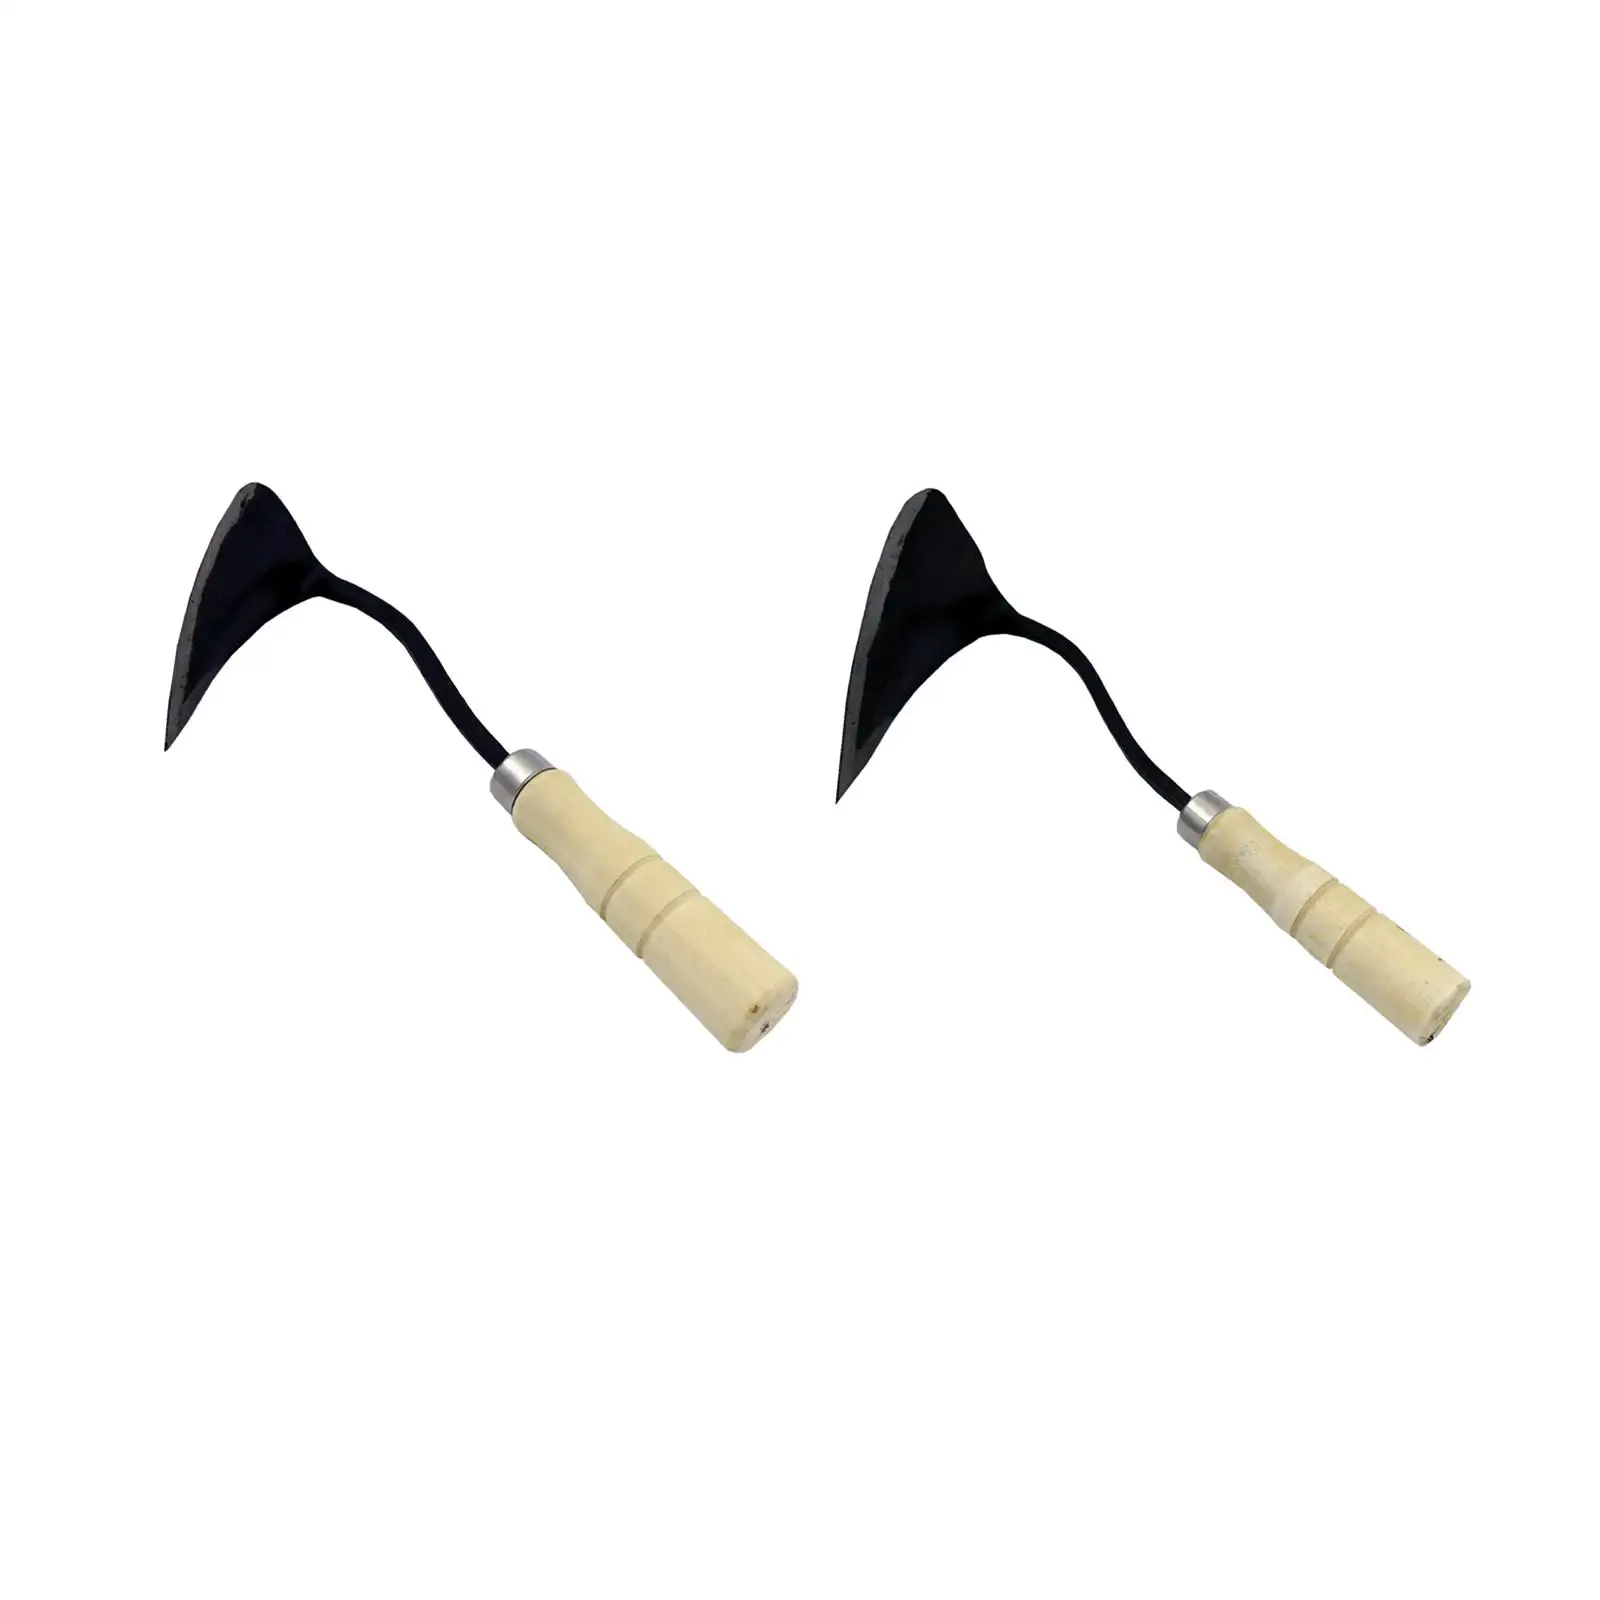 

Gardening Plow Hoe Durable Traditional Sharp Wide Blade Weeder Removal for Weeding Planting Kids and Adults Yard Lawn